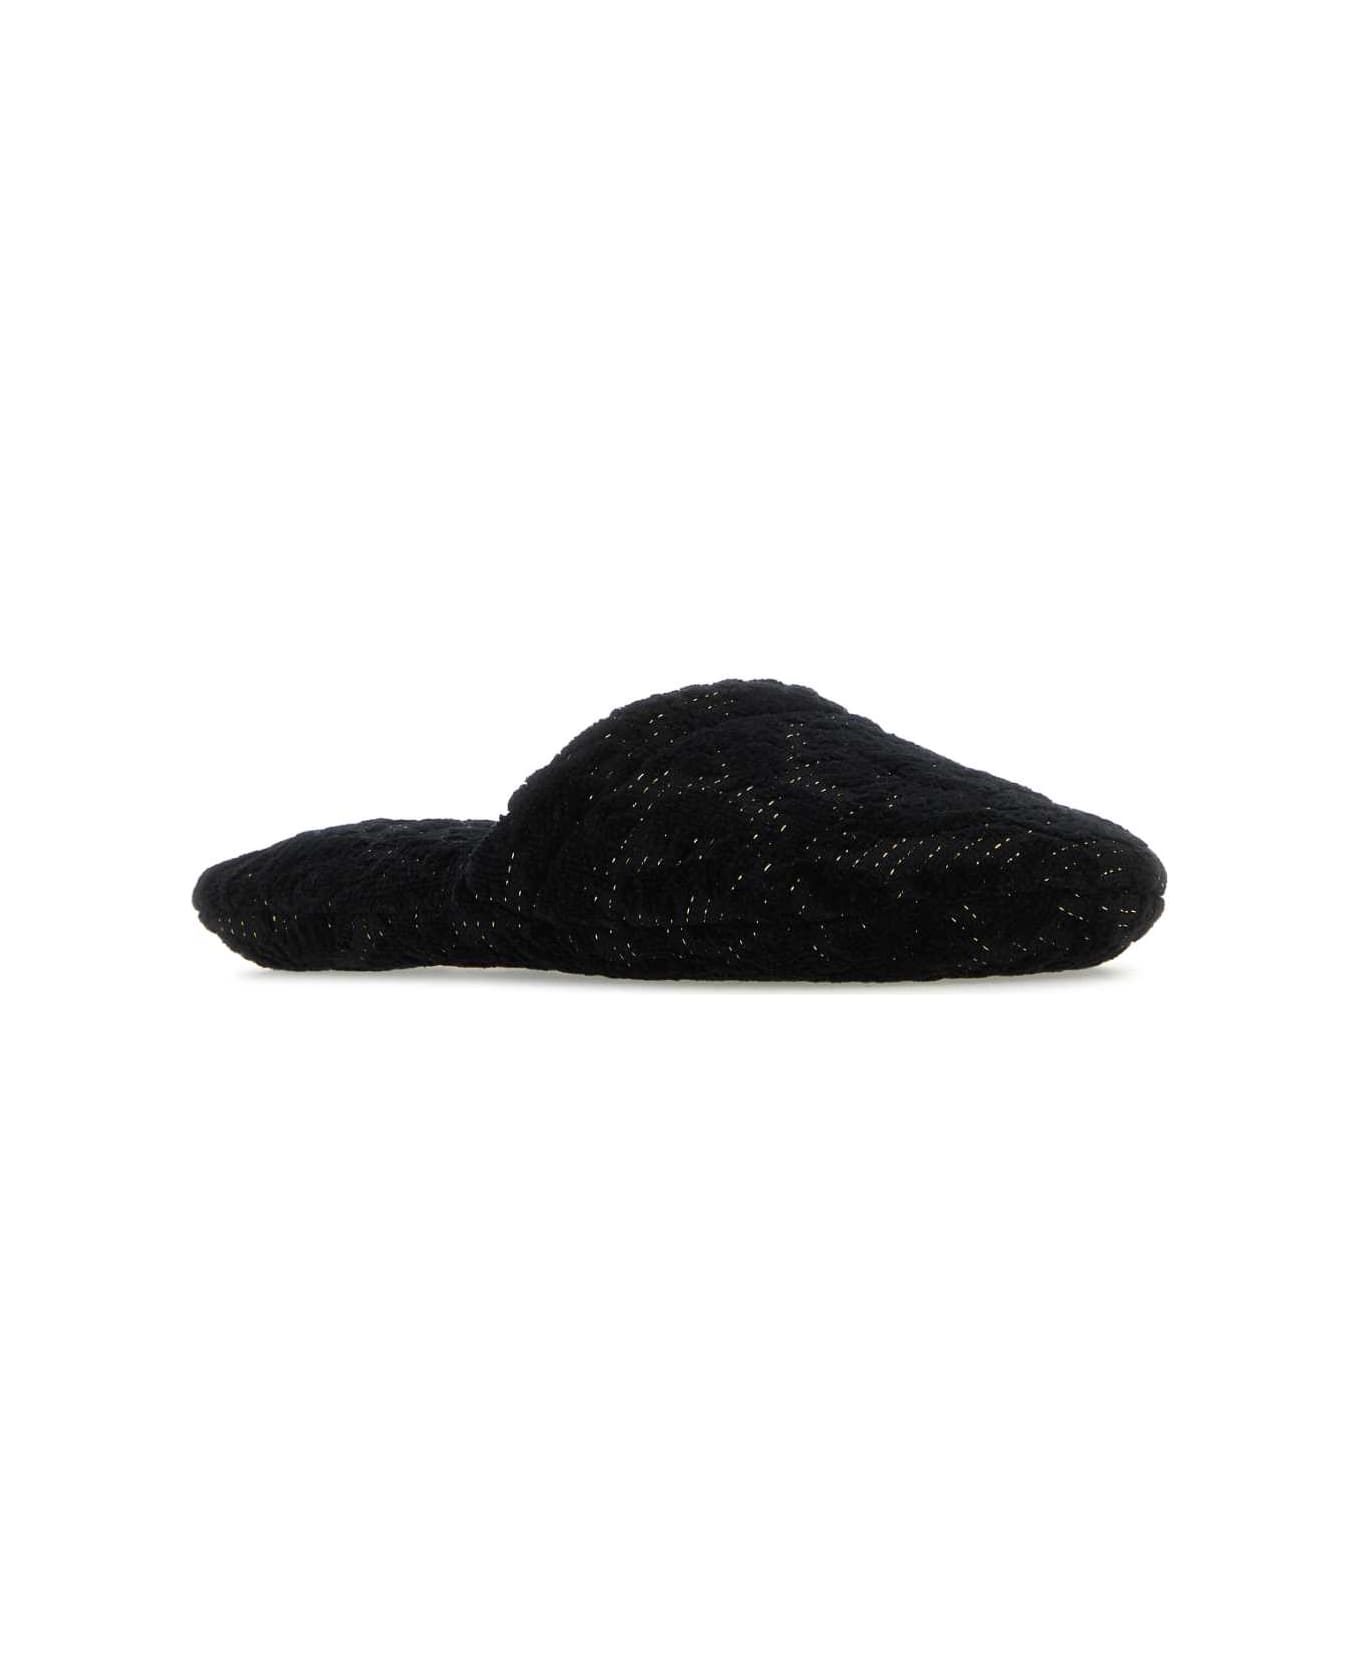 Versace Black Cotton Blend Slippers - ANTHRACITE